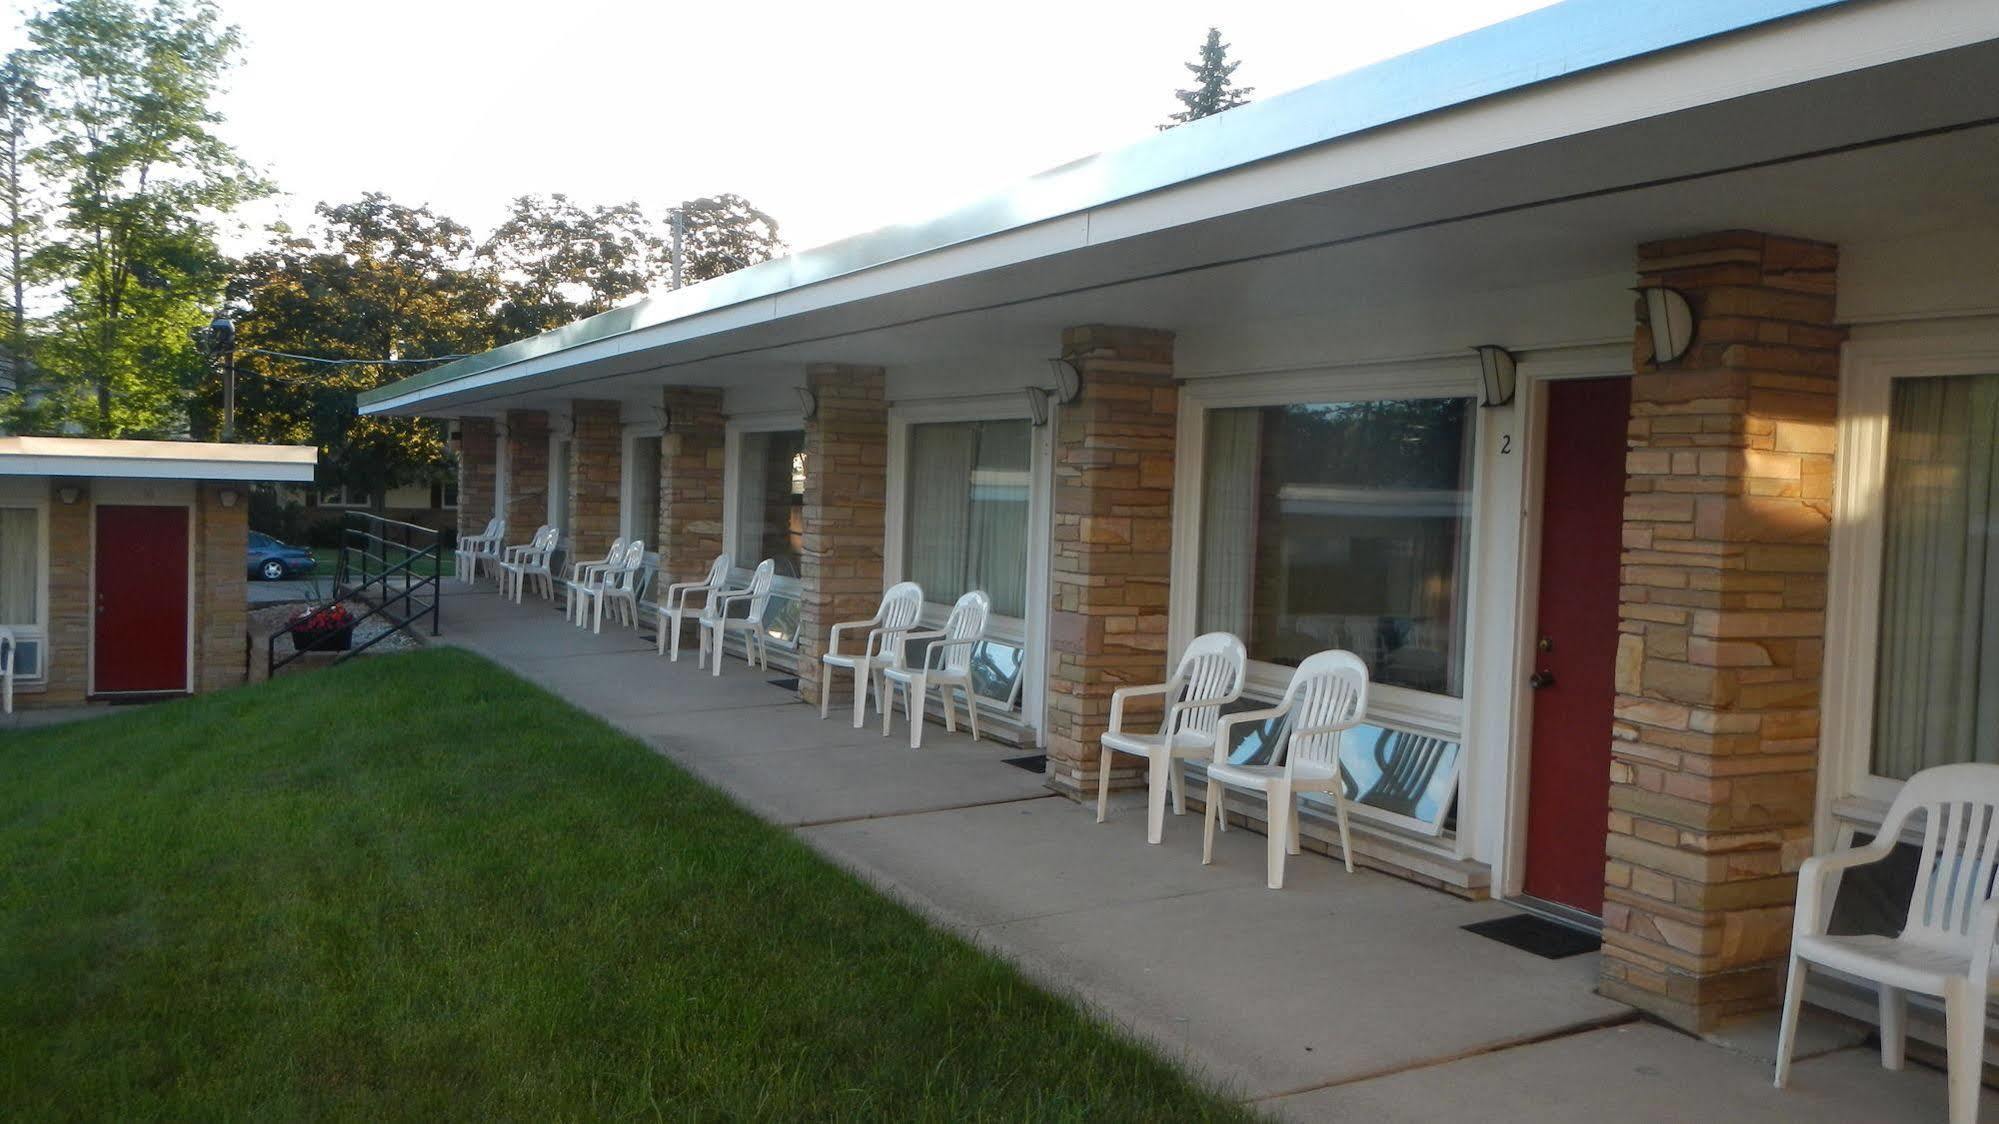 Indian Trail Motel Wisconsin Dells Exterior photo